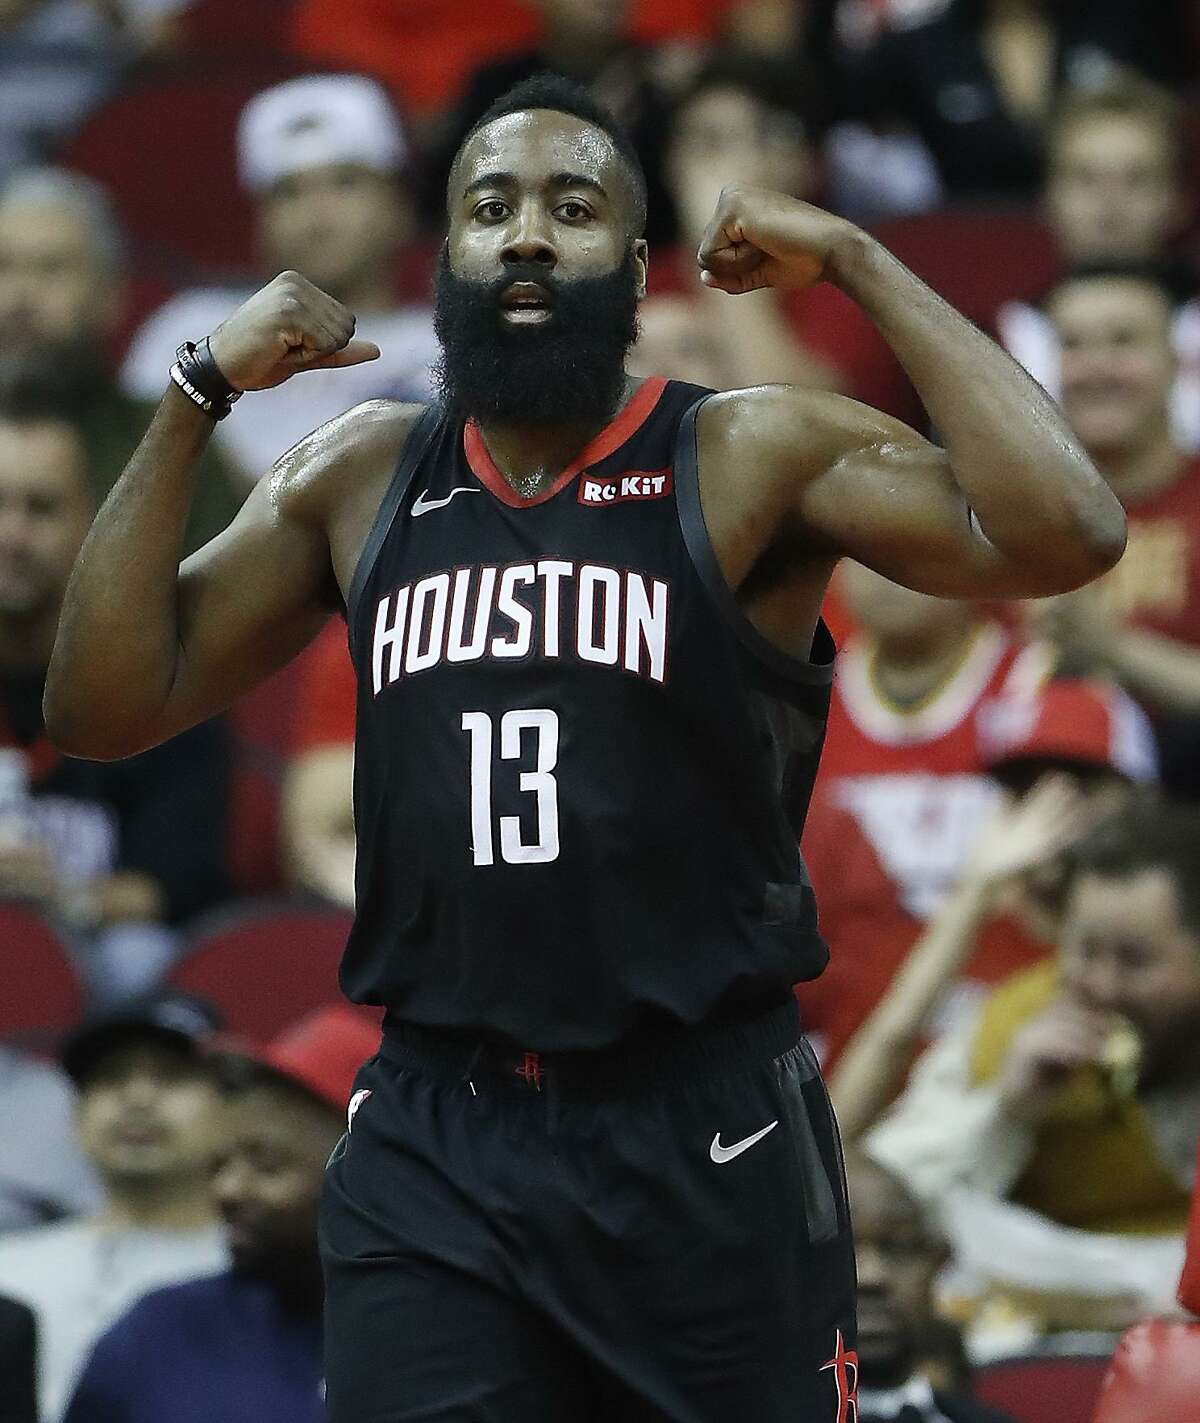 Guard James Harden scored 13 of the Rockets’ 19 fourth-quarter points, including eight in the final two minutes capped by a dagger 3 with 13.3 seconds left. He finished with 47 points and missed only one of his 16 free-throw attempts.